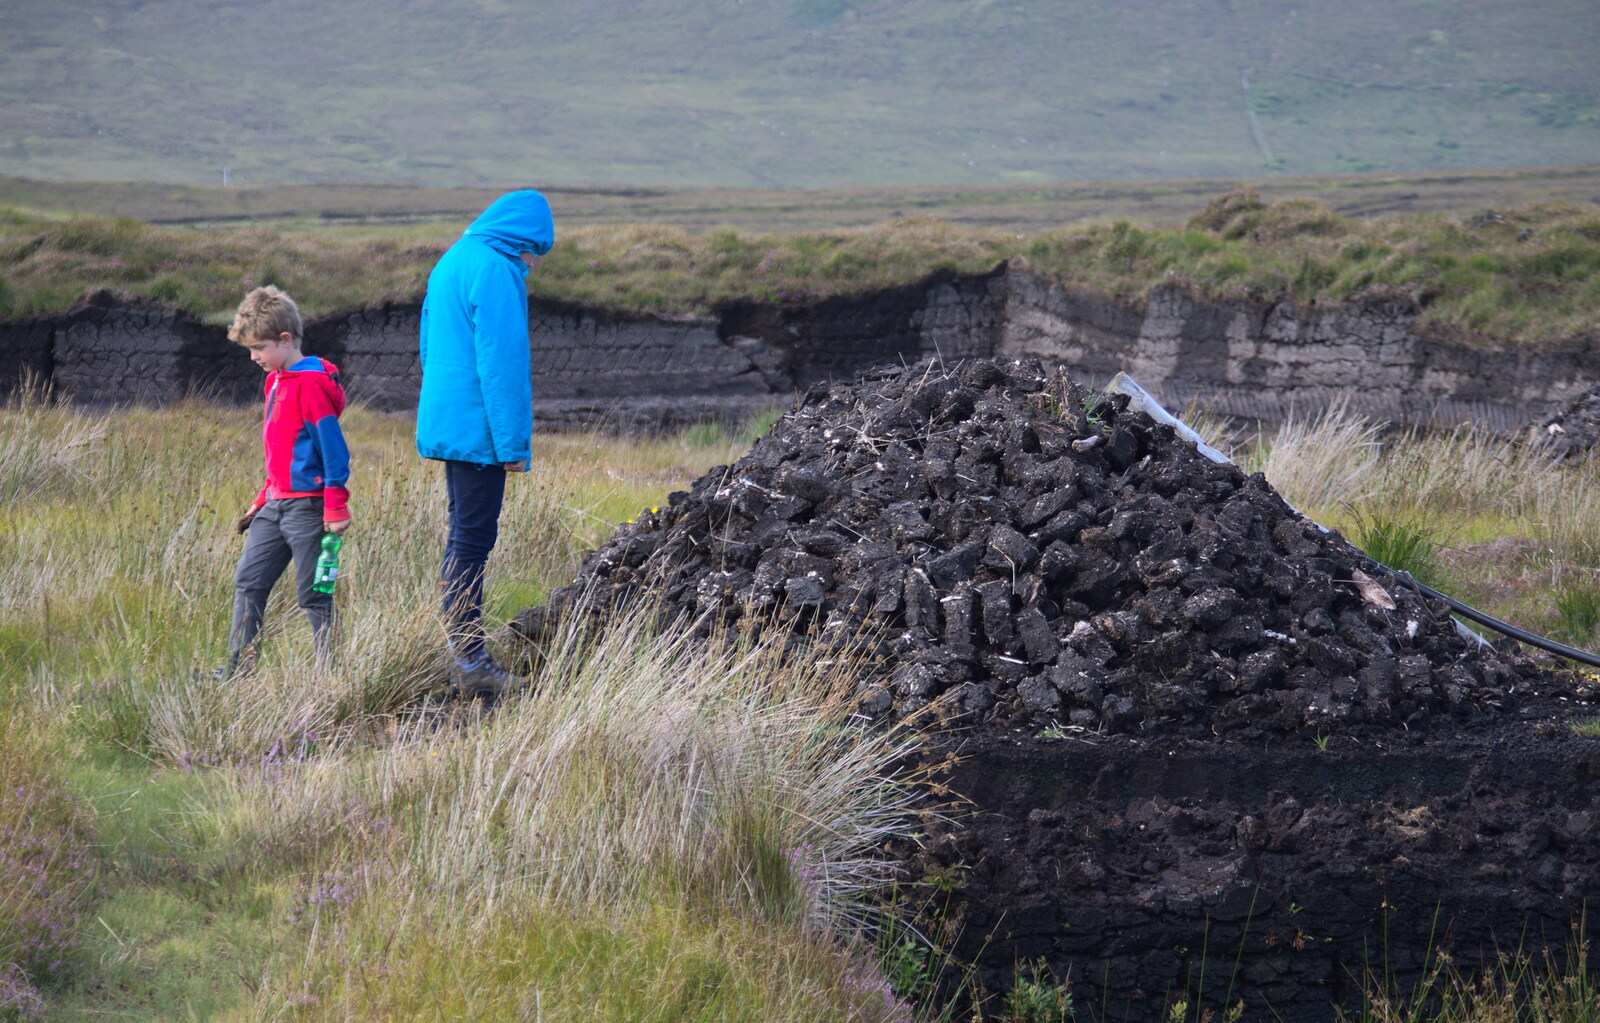 Isobel looks down on a big mound of peat from Surfing Achill Island, Oileán Acla, Maigh Eo, Ireland - 8th August 2017